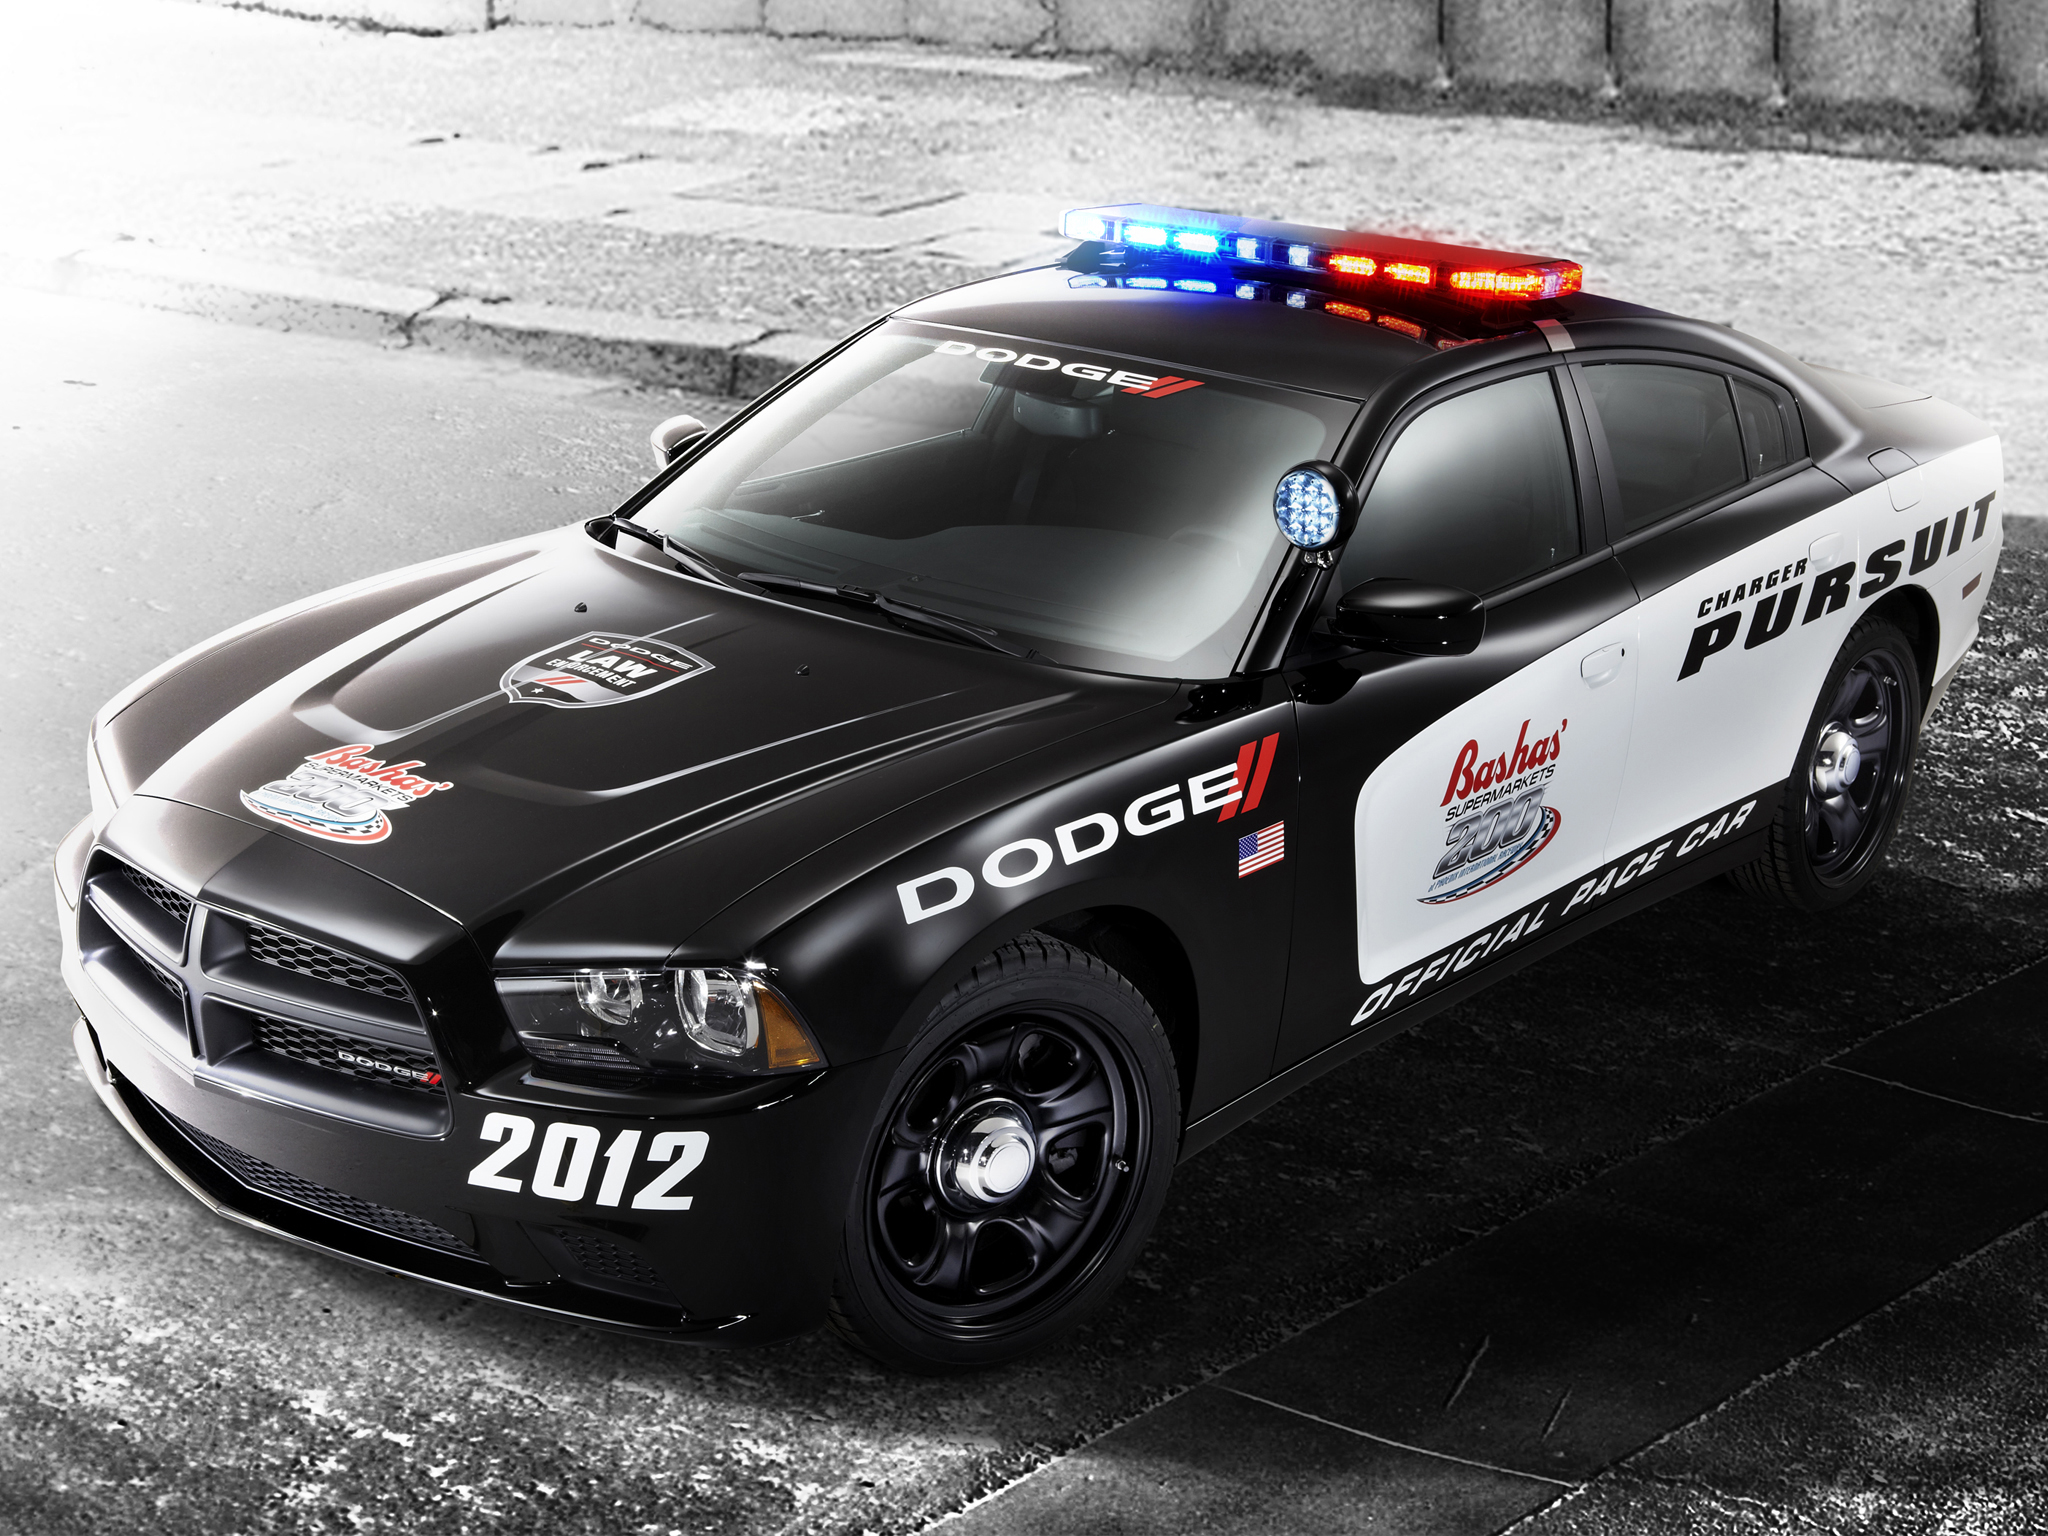 2012, Dodge, Charger, Pursuit, Pace, Nascar, Muscle, Police Wallpaper